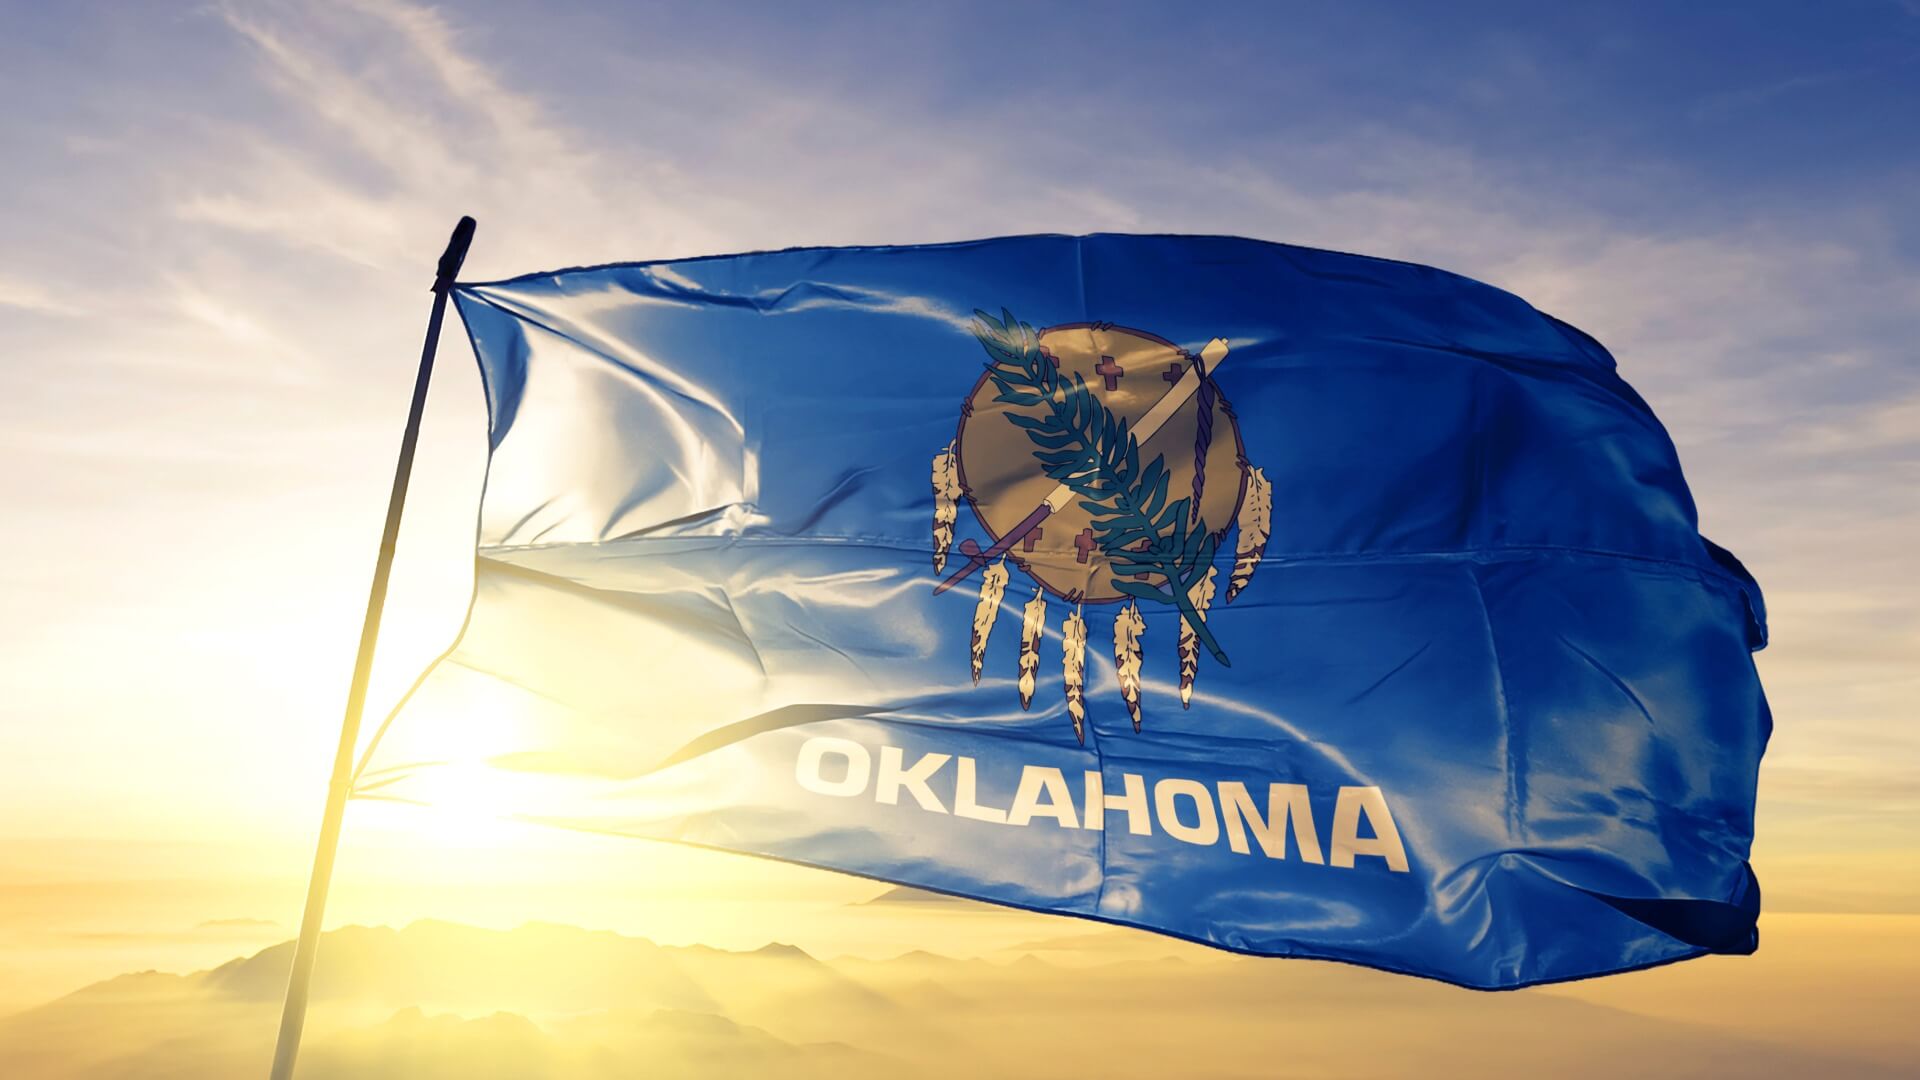 Oklahoma state flag waving in the wind